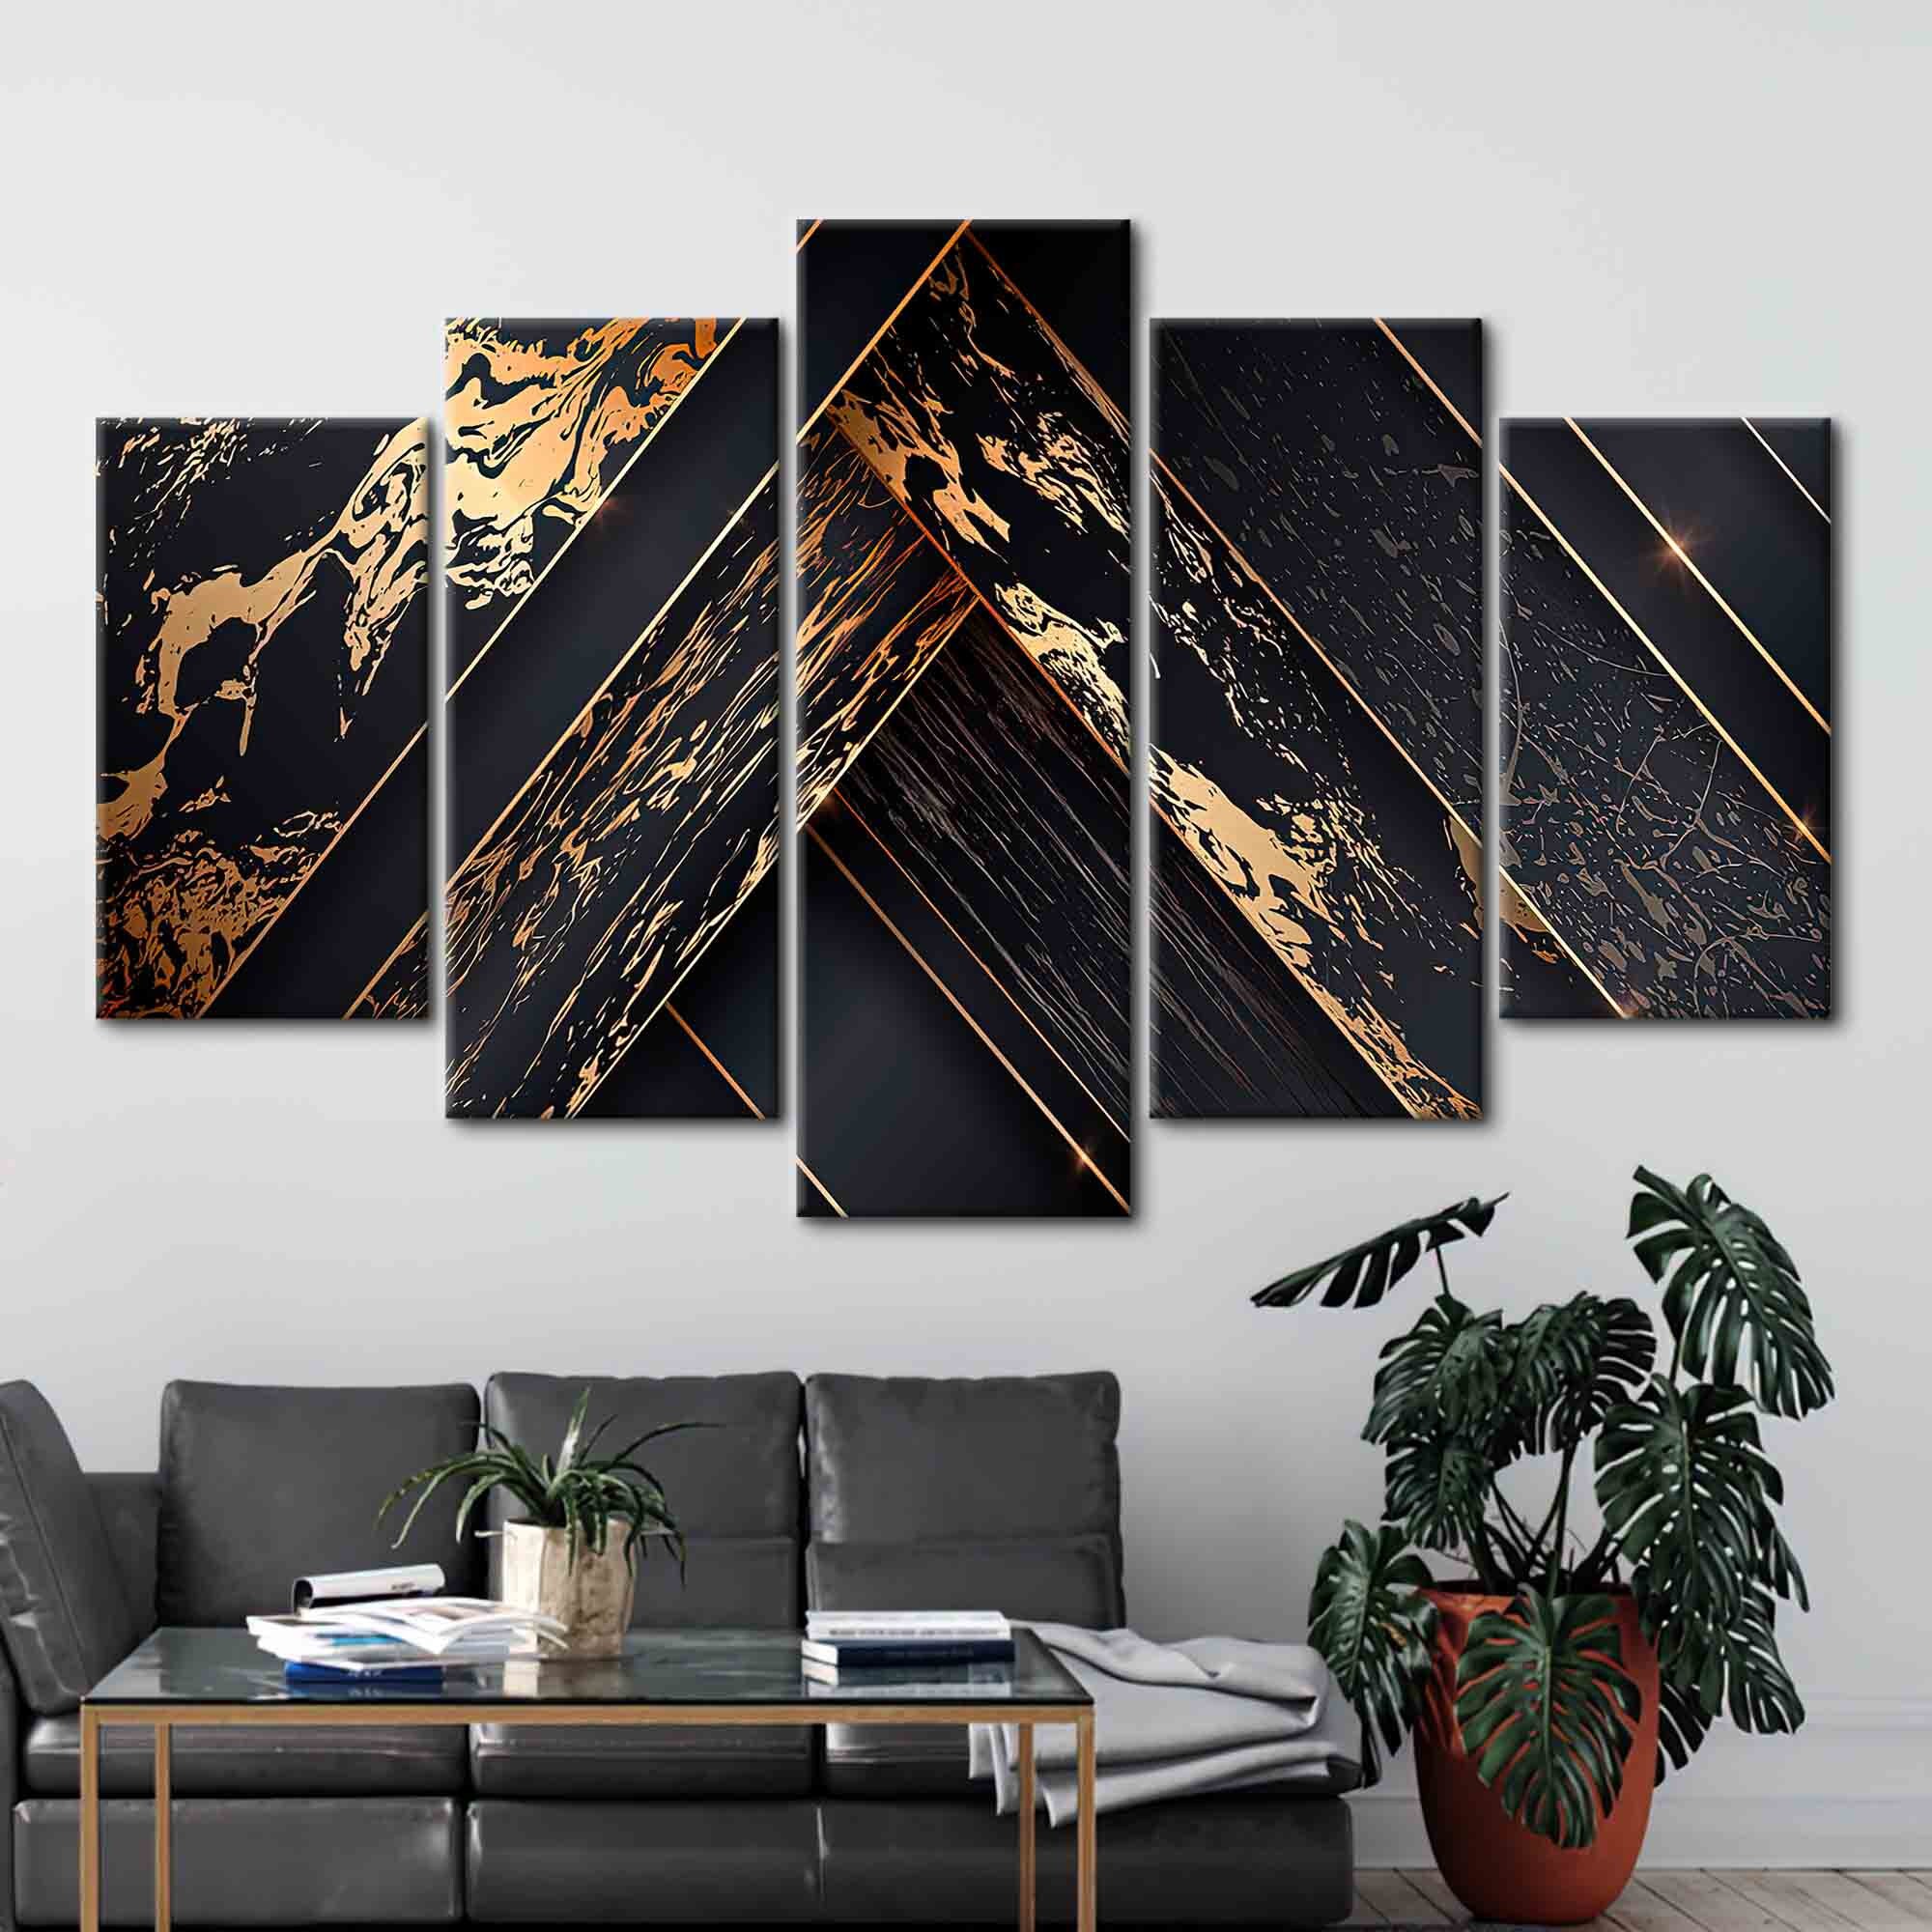 Bulldog Leather Works African American Wall Art, Canvas Painting Black and Golden Woman Portrait Abstract Gold Earrings Necklace Poster Artwork